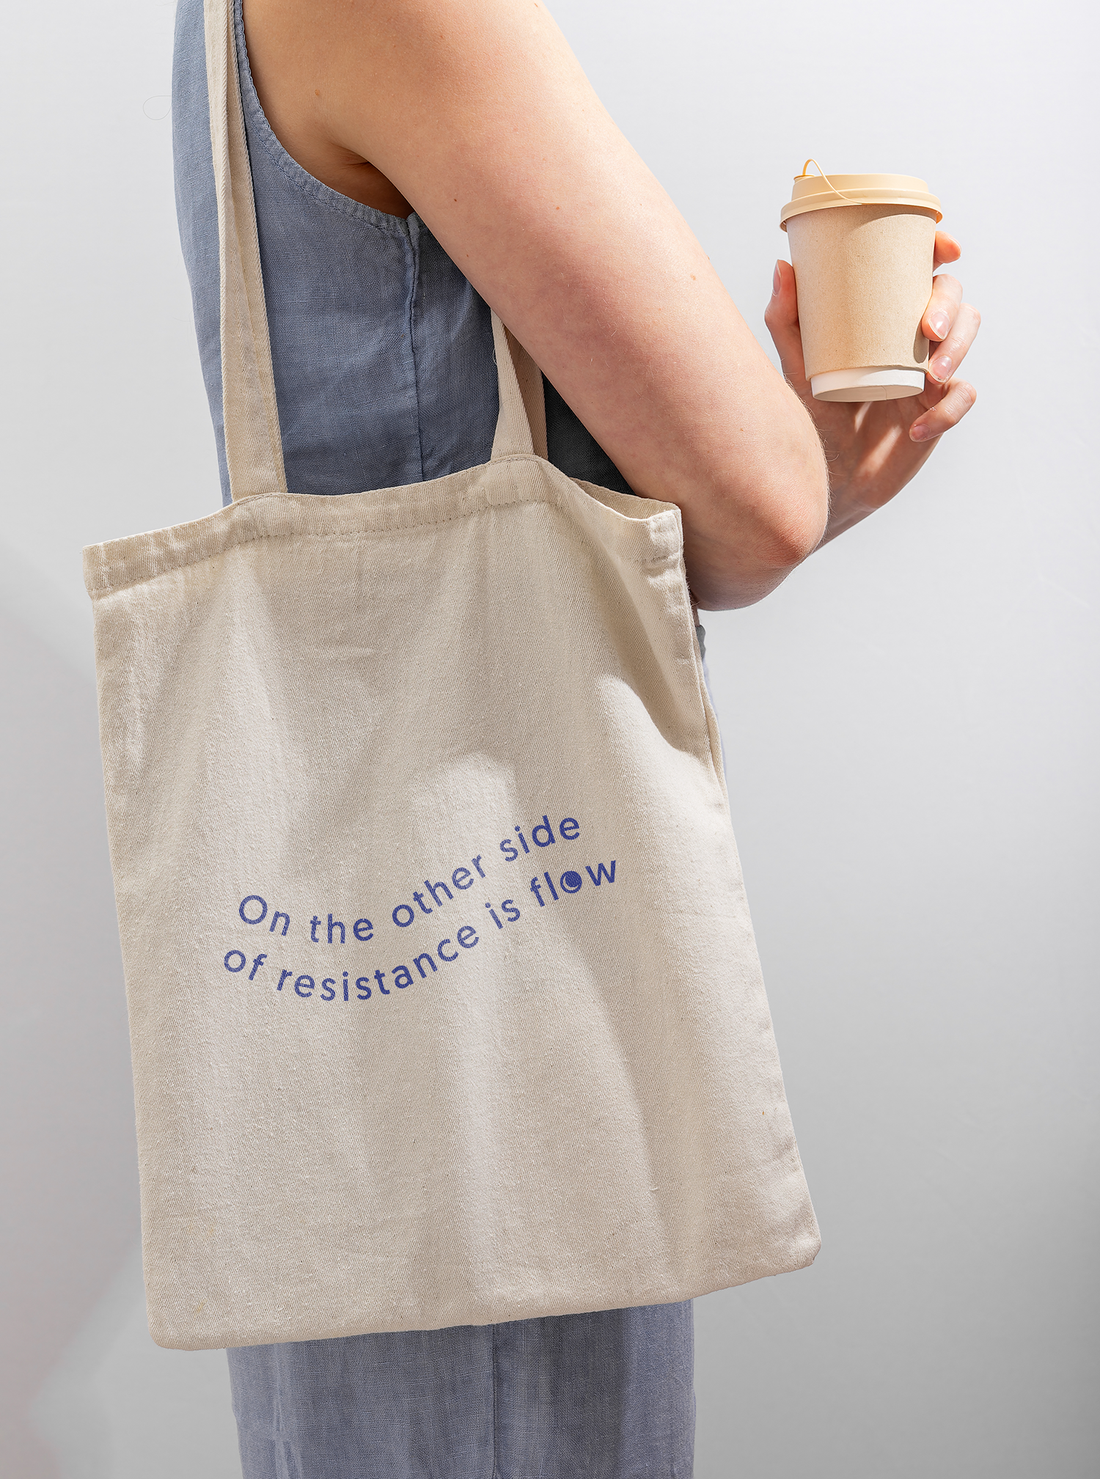 Mindful tote, by In Flow